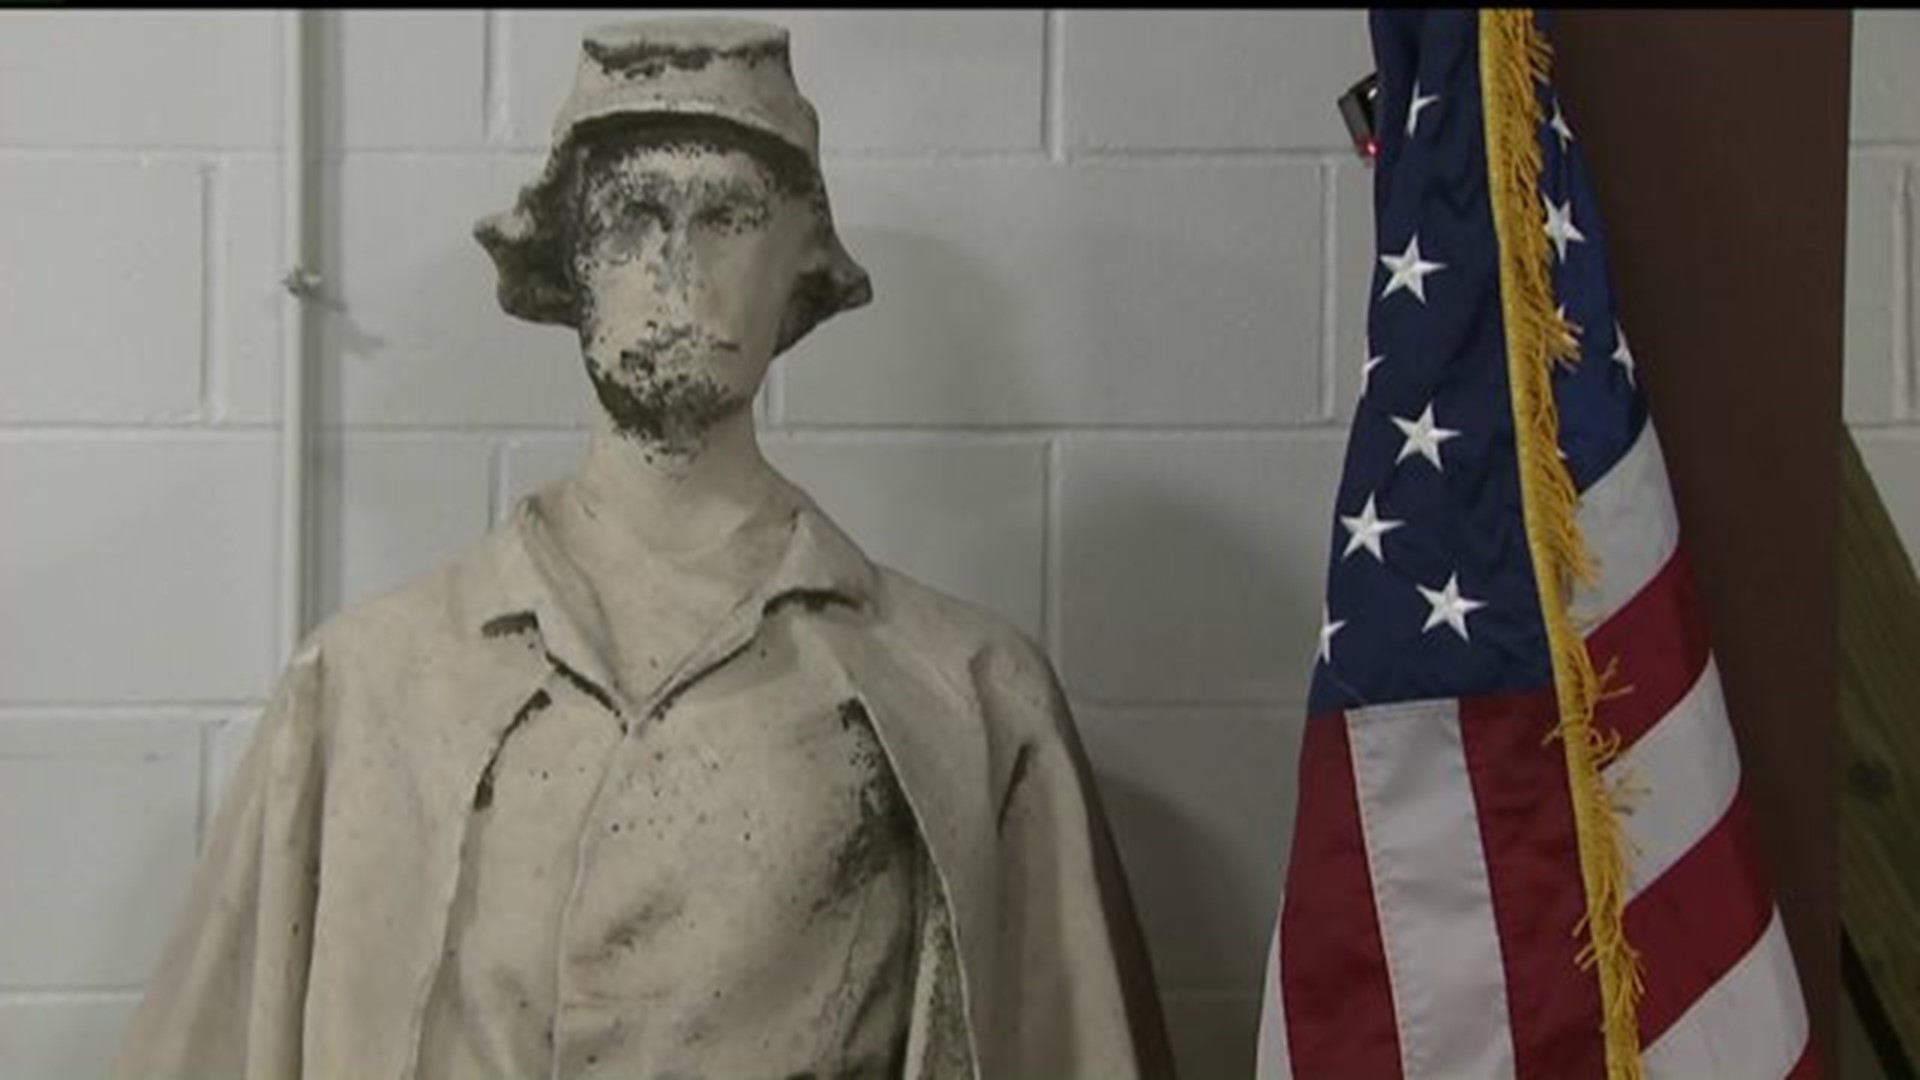 Committee formed to save Civil War soldier